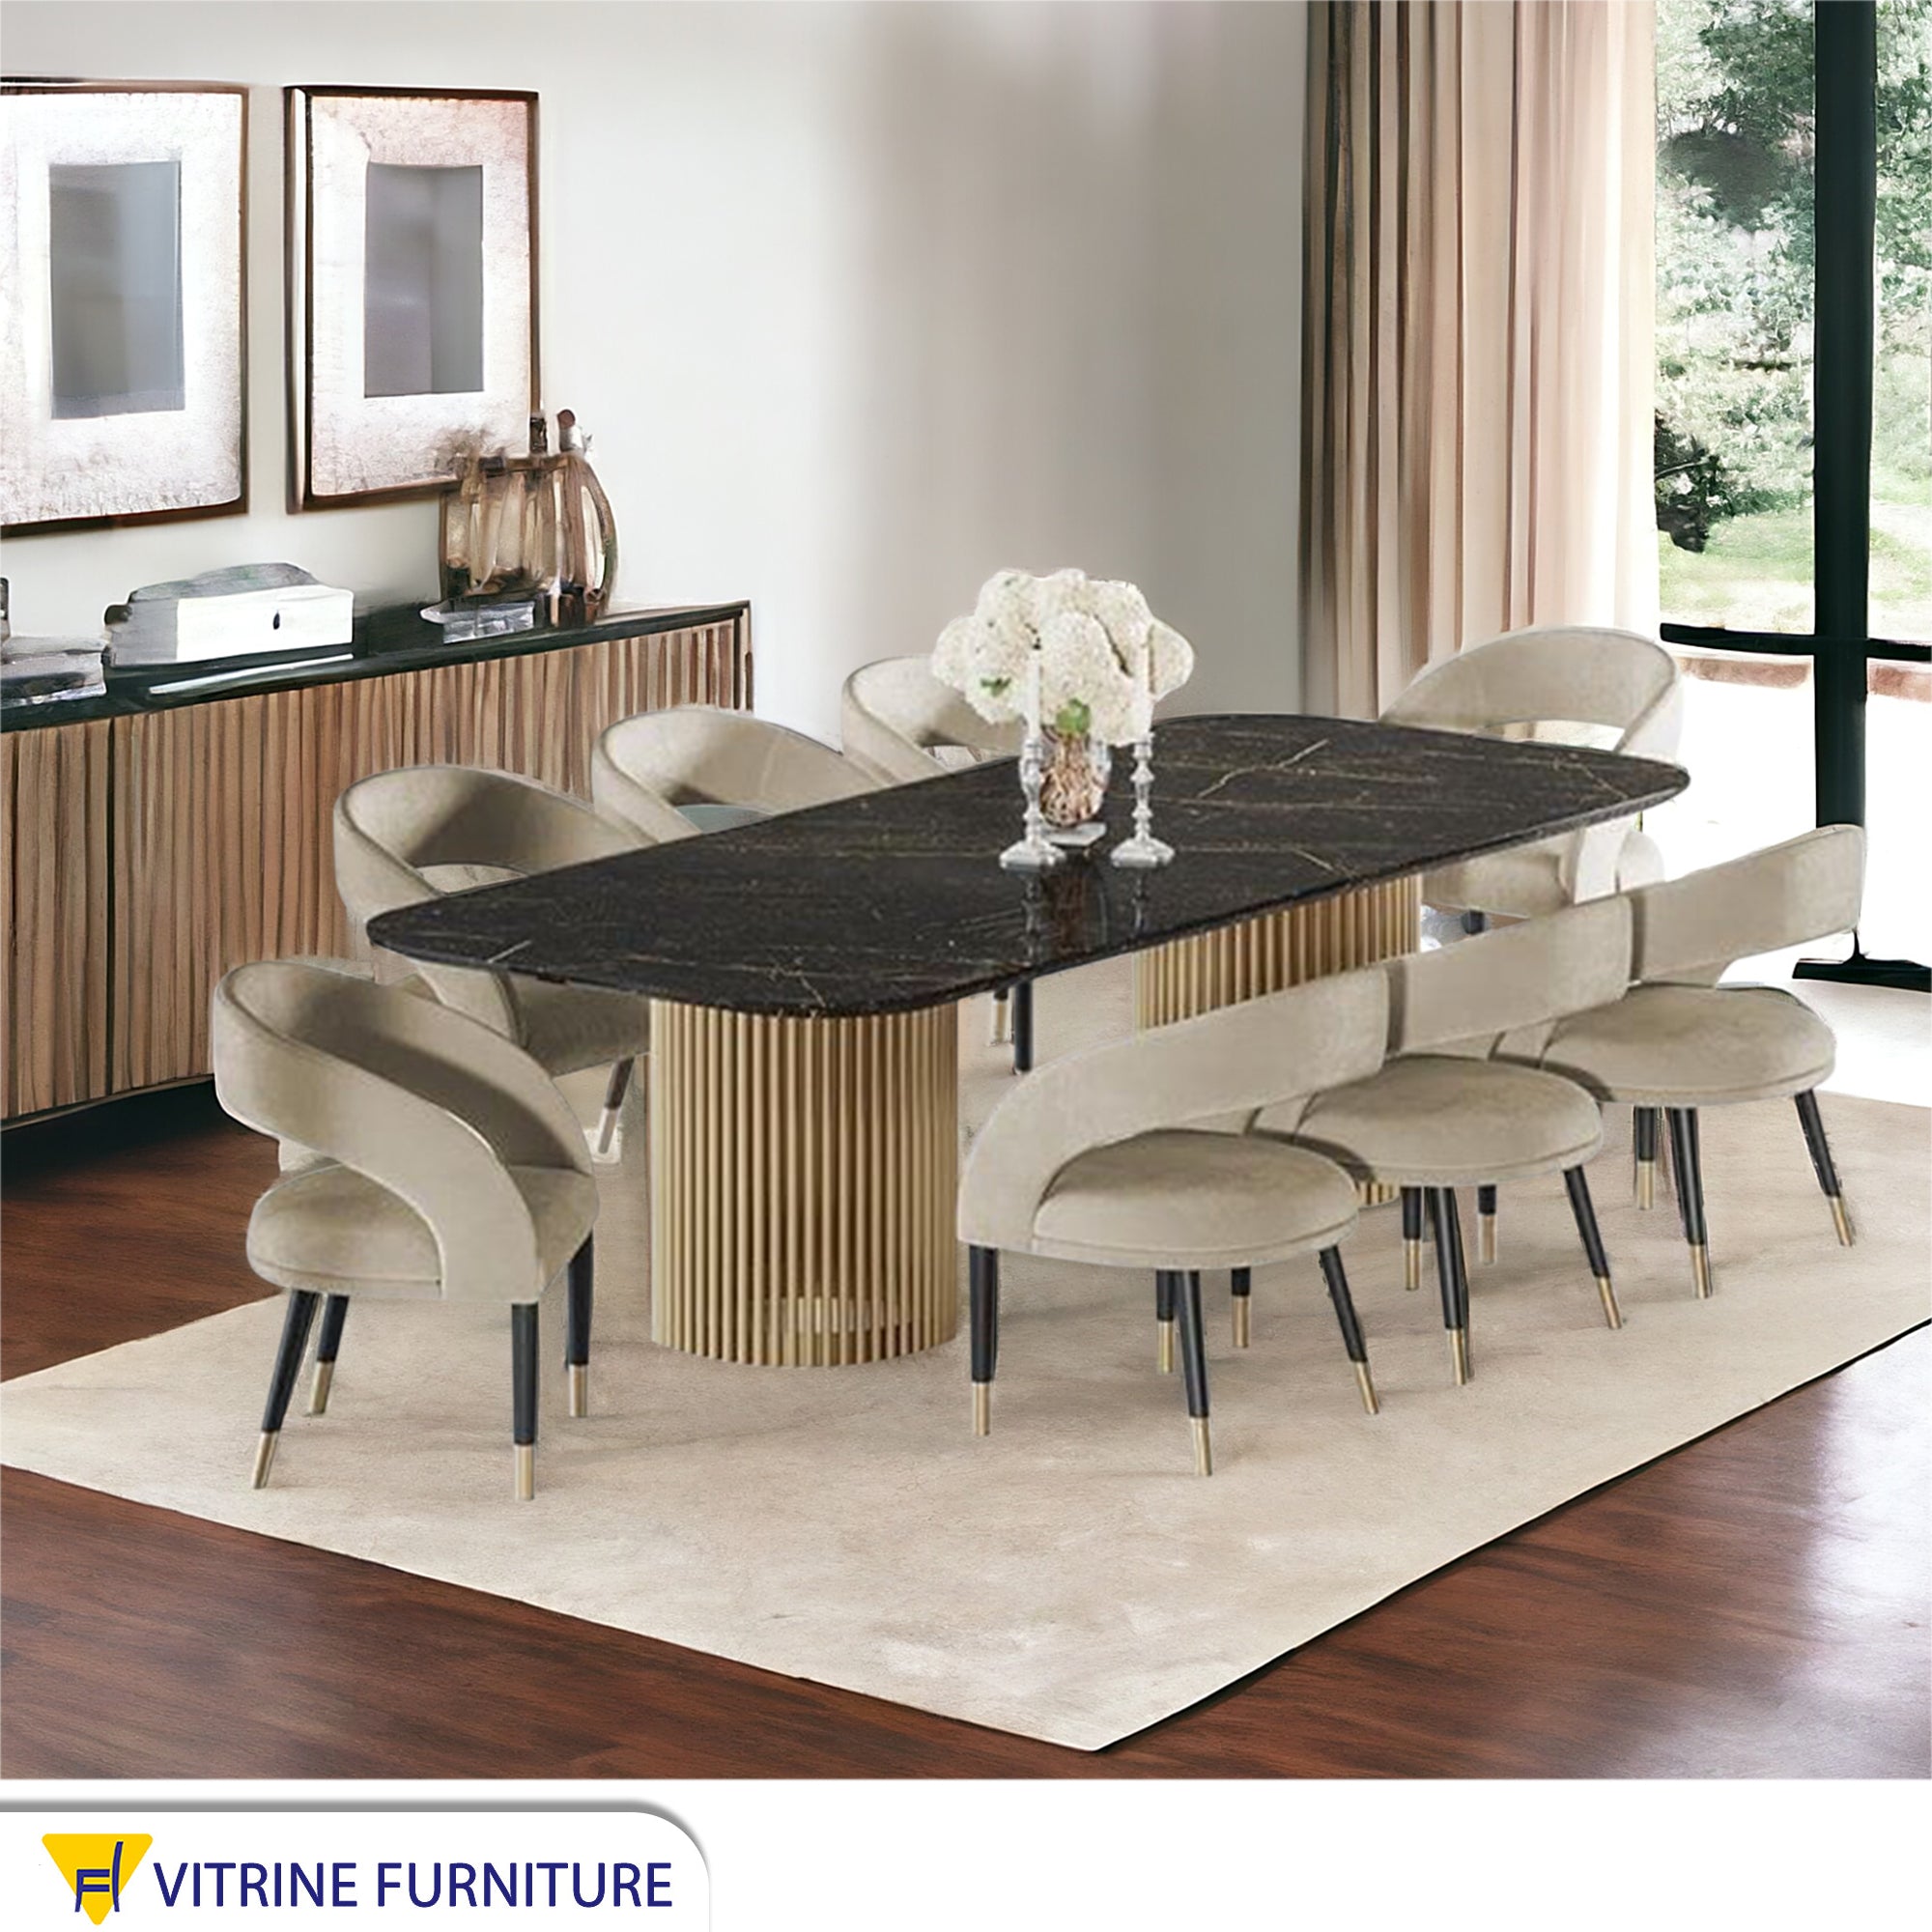 A large dining table with cylindrical legs